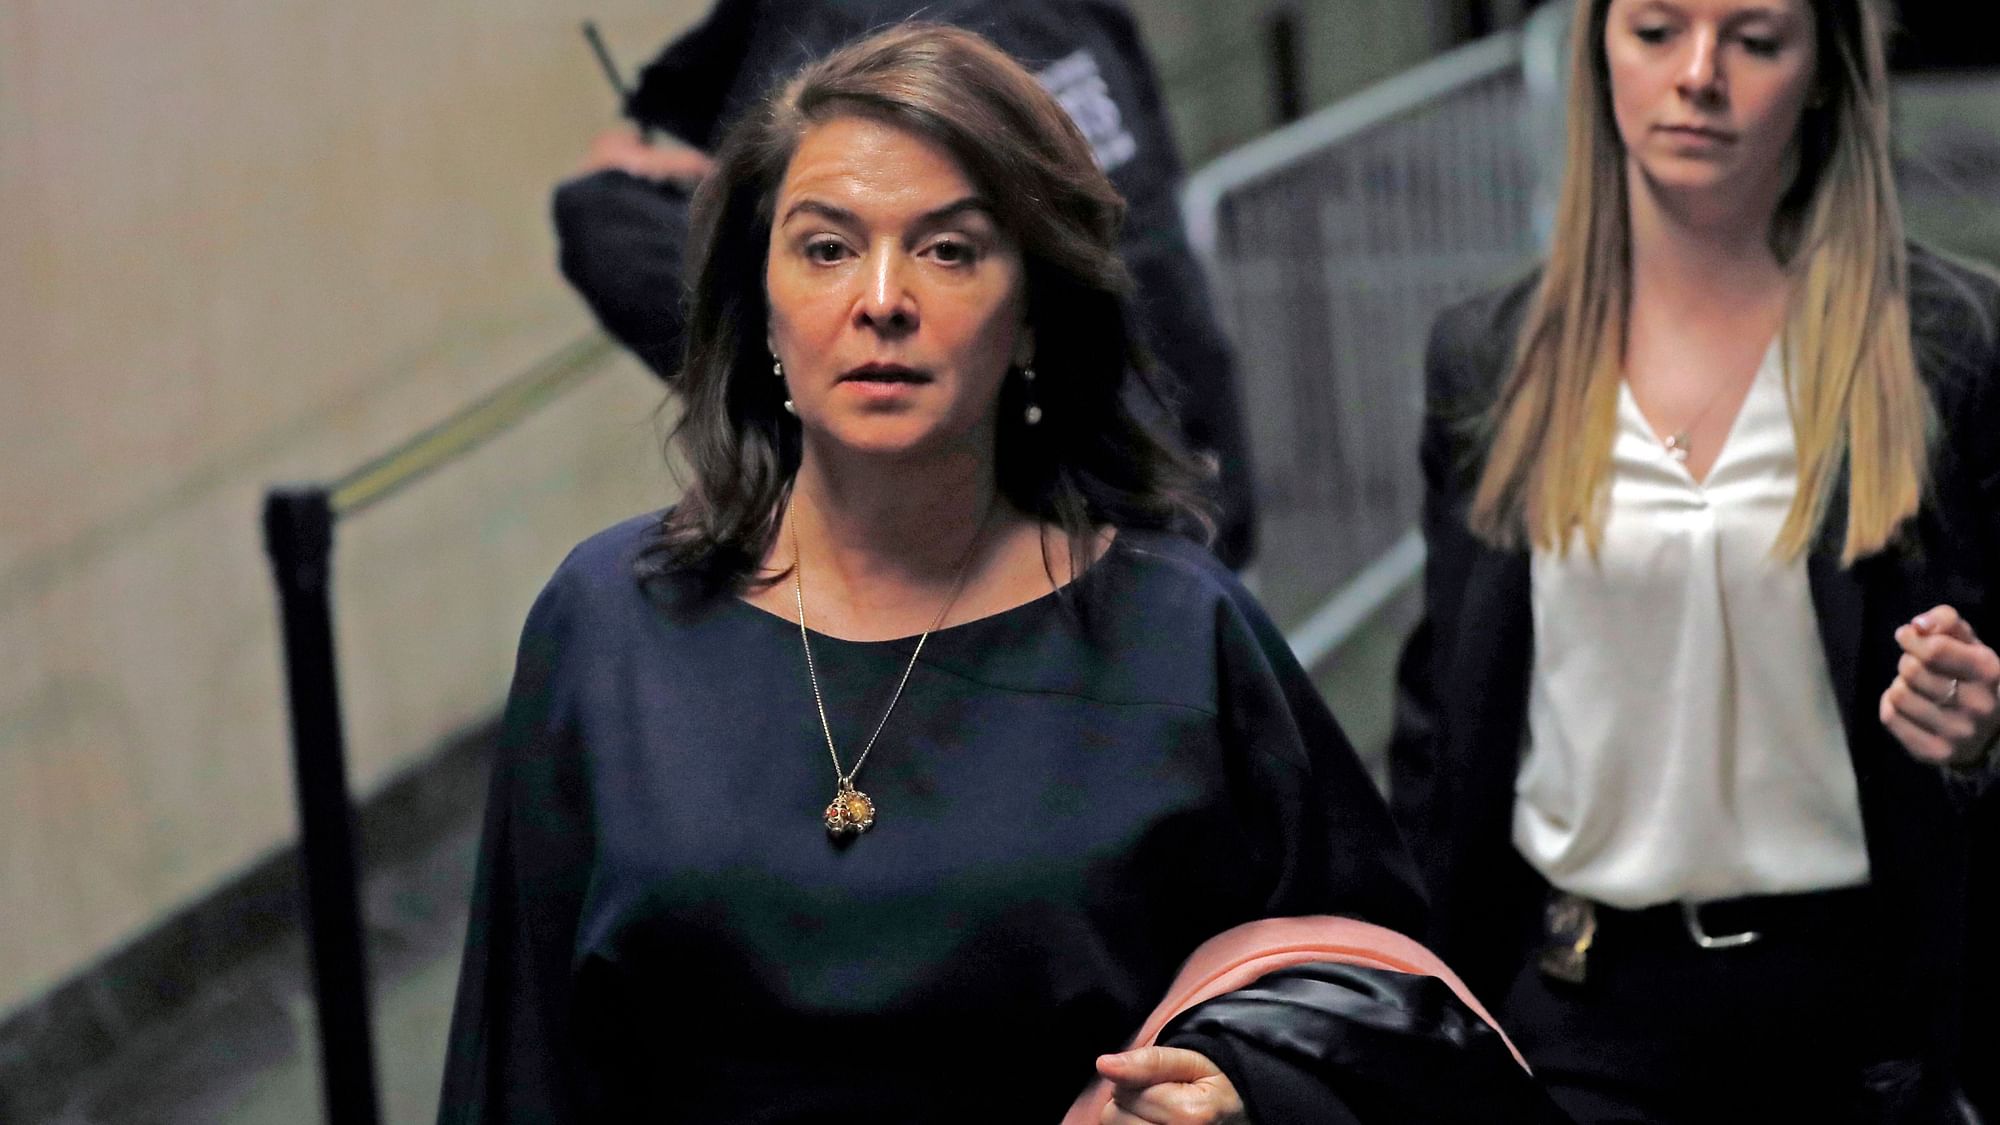 Actress Annabella Sciorra, left, leaves Manhattan Criminal Court after appearing at Harvey Weinstein’s rape and sexual assault trial, Thursday, 23 January 2020, in New York.